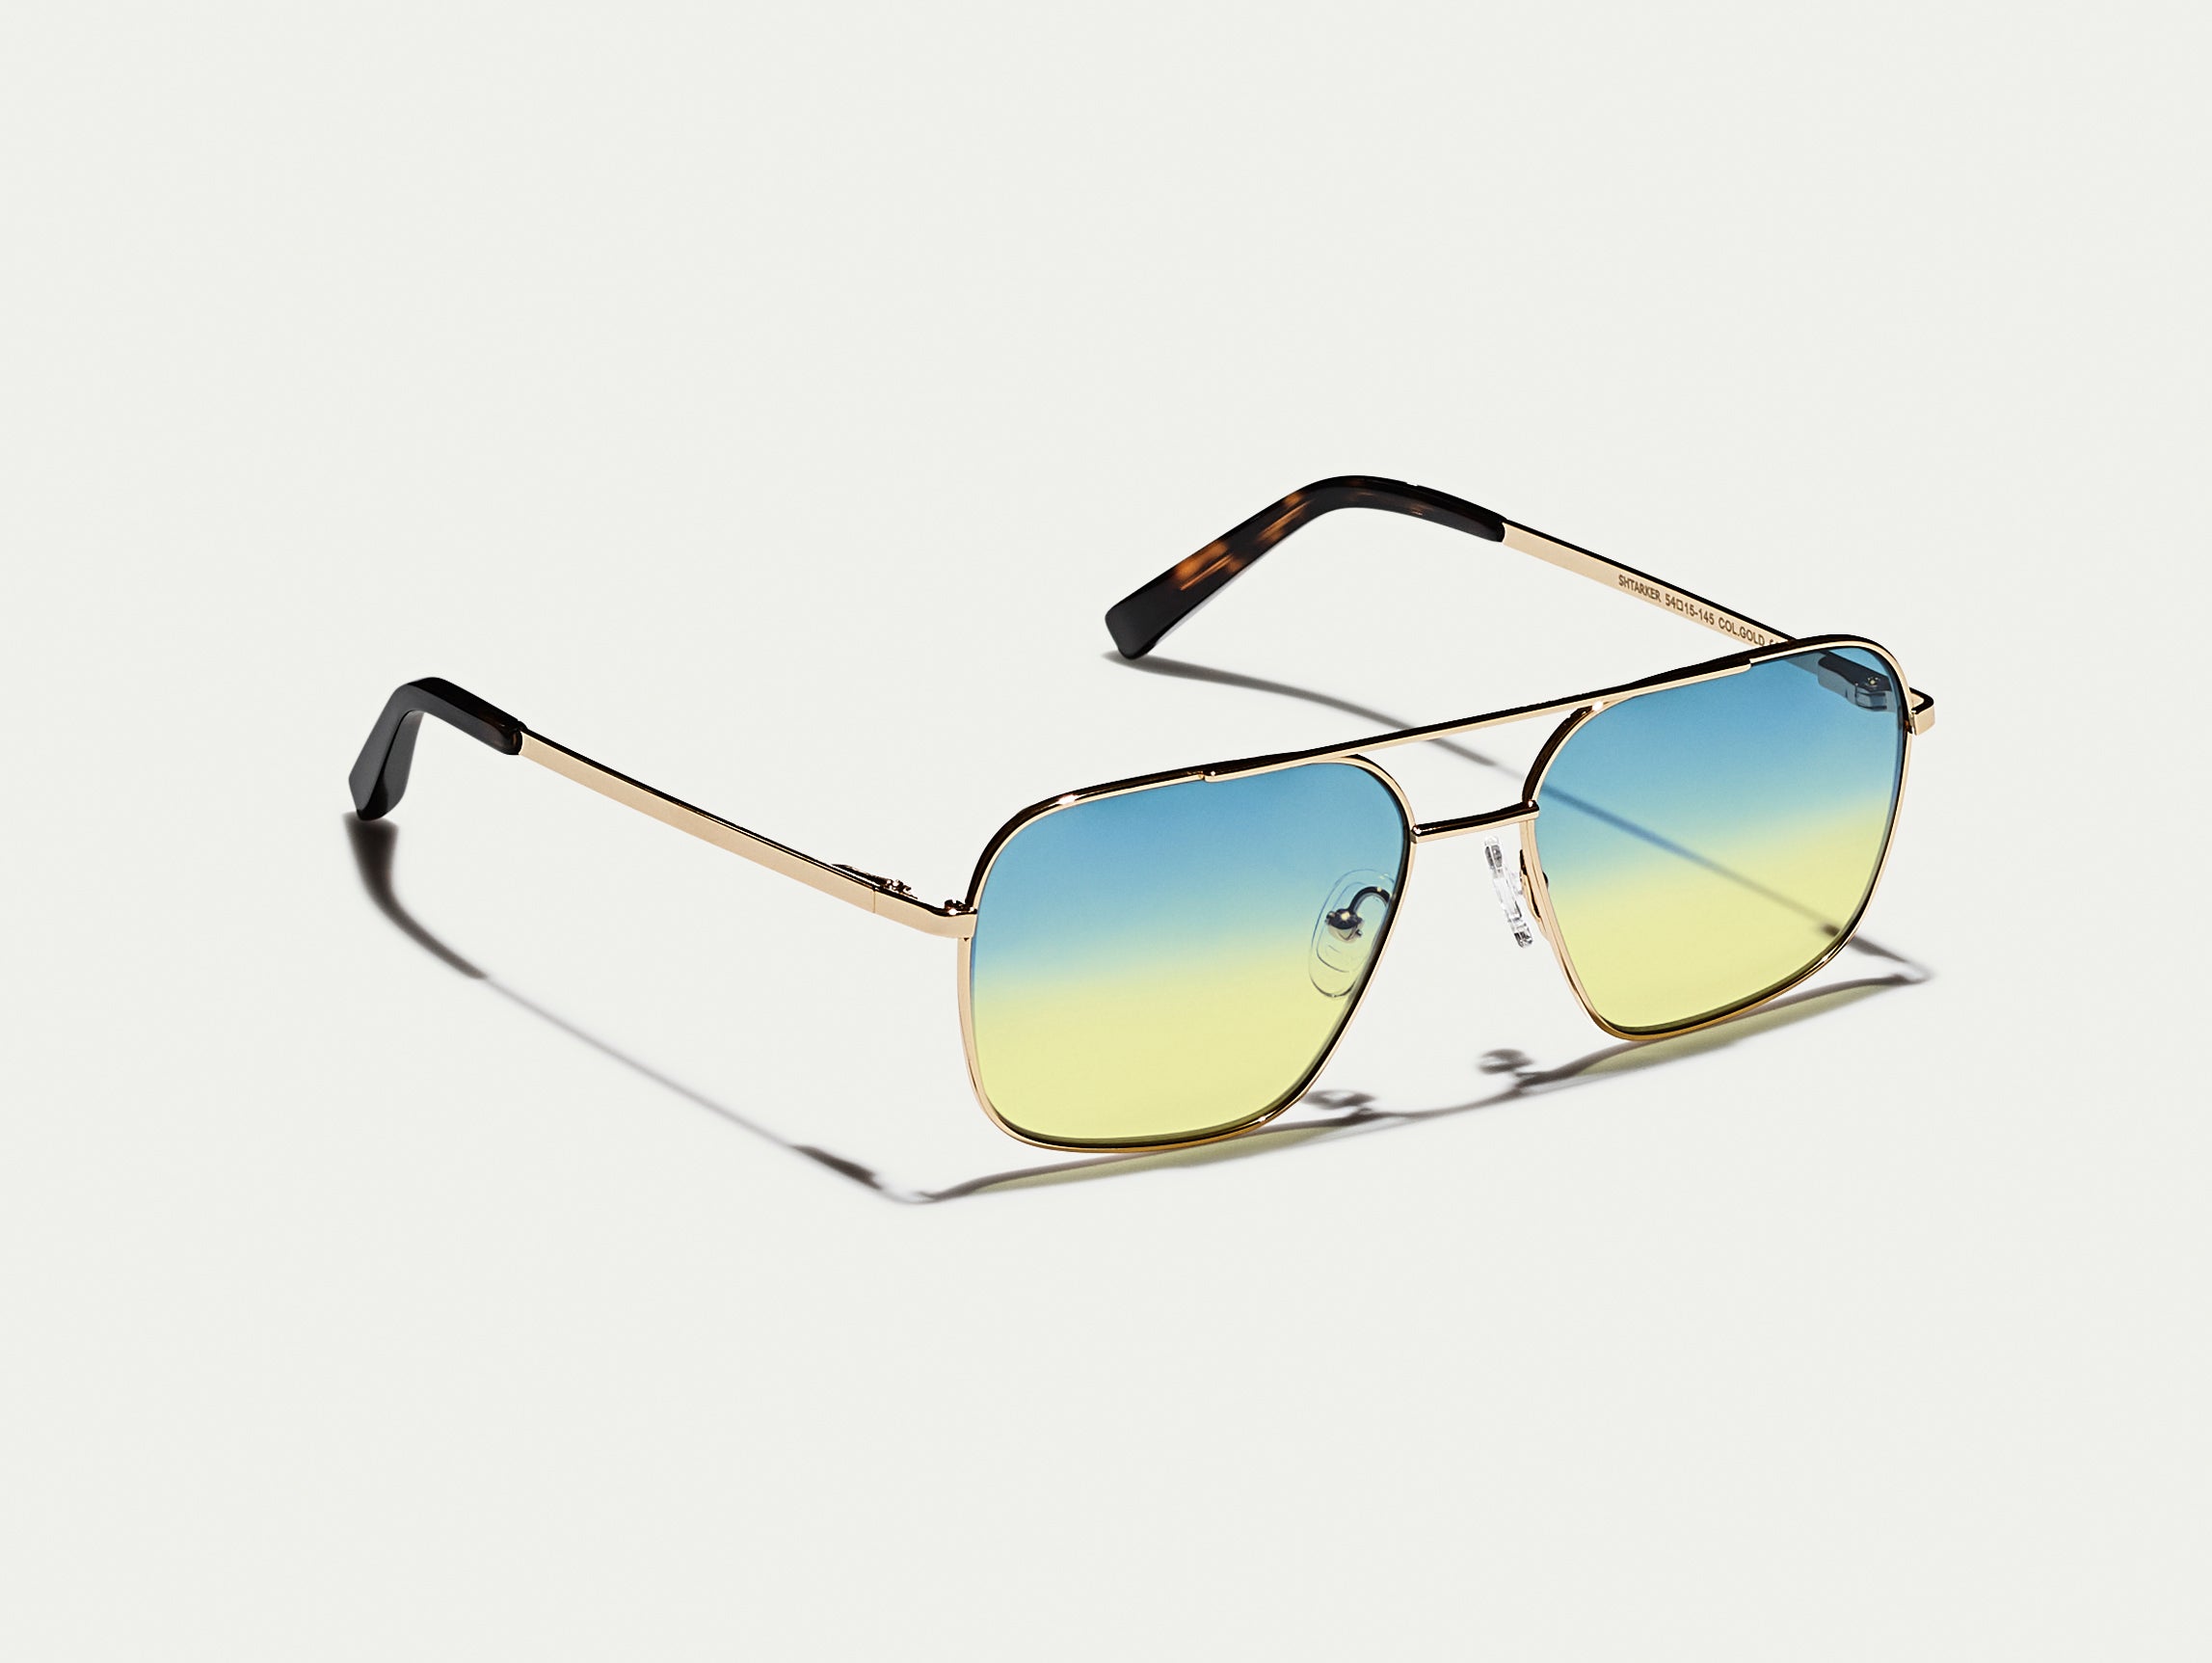 The SHTARKER in Gold with Aqua Sunrise Tinted Lenses